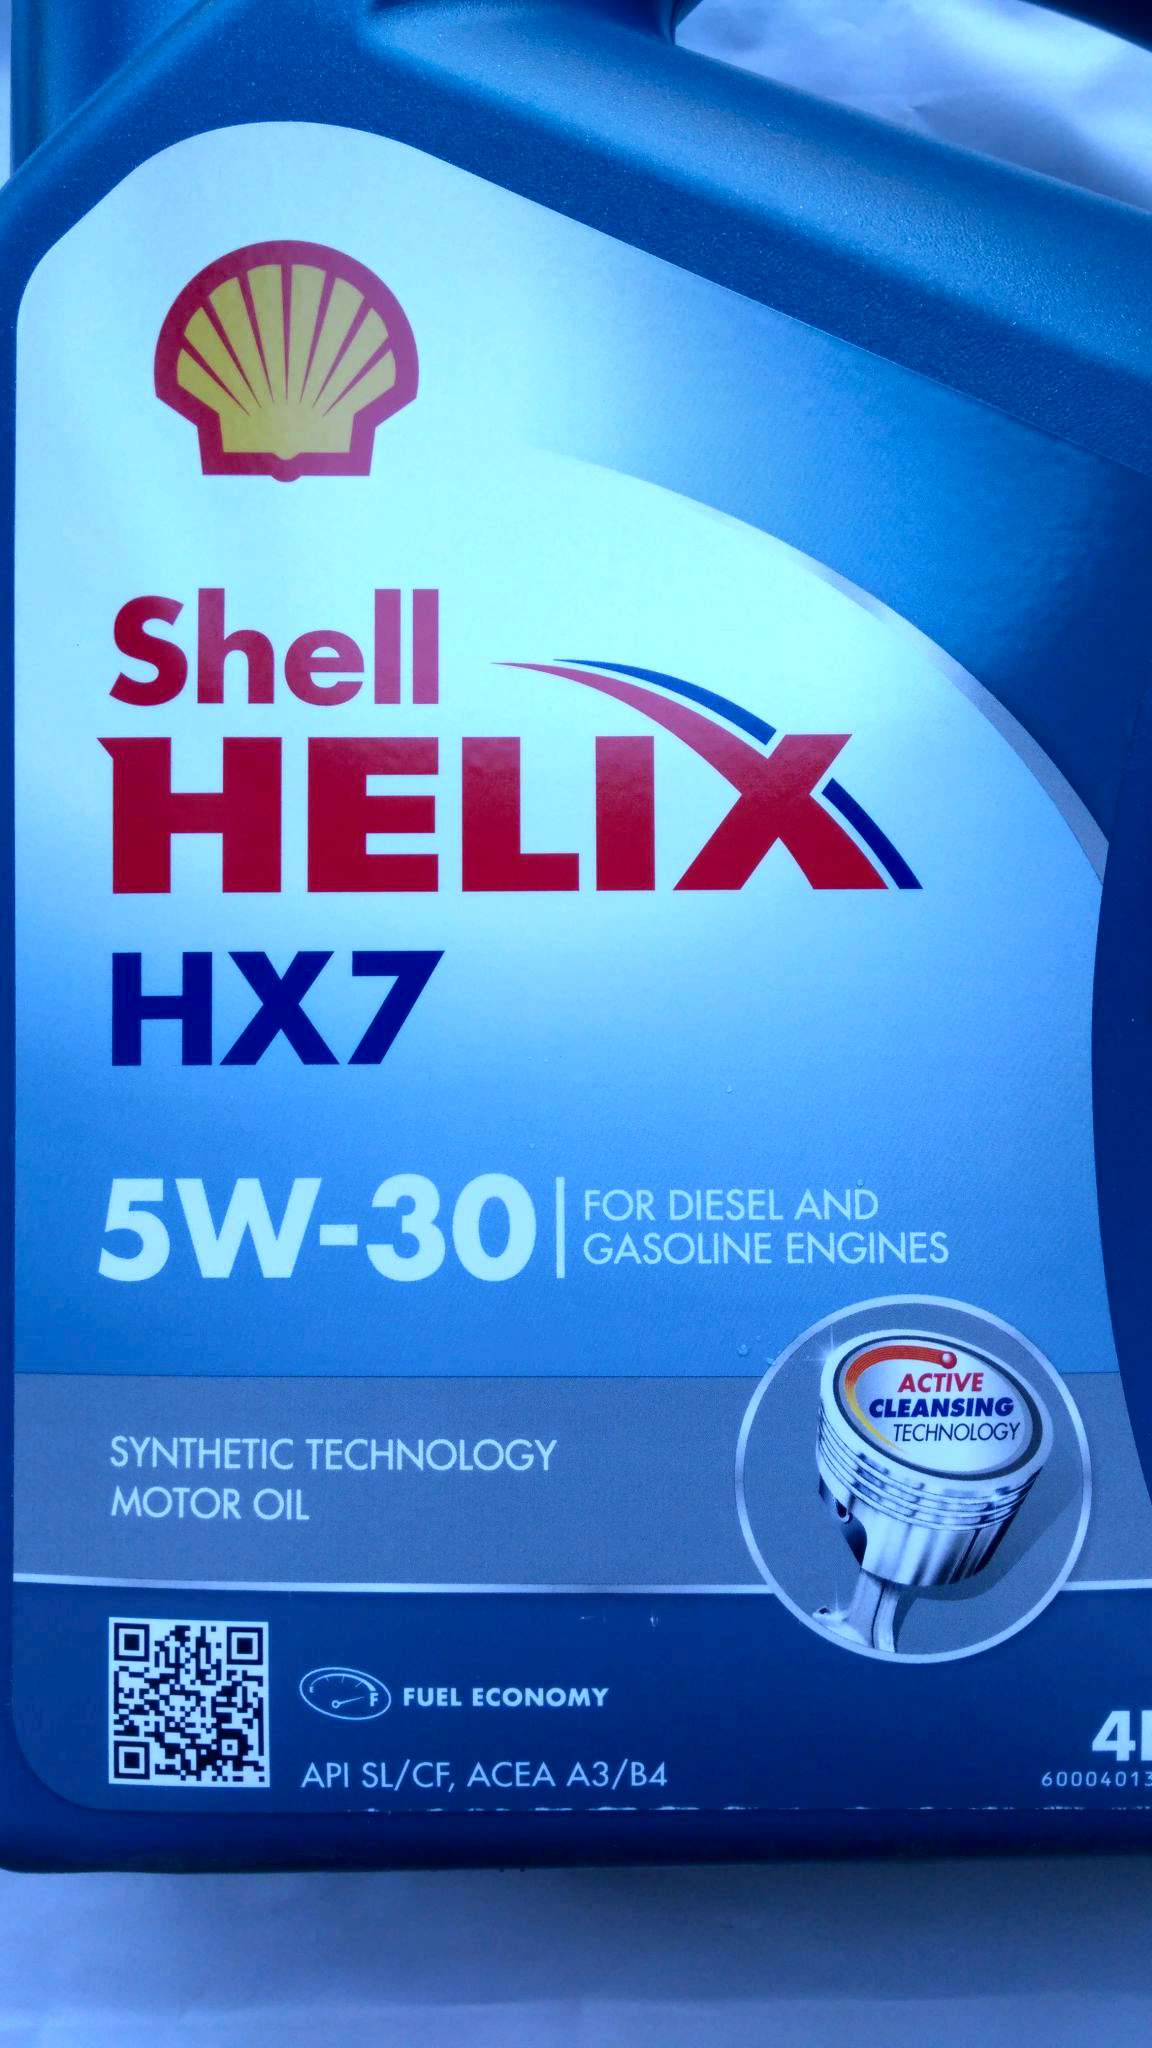 Моторное масло shell helix цена. Shell Helix 10w30. Shell Helix hx7 5w-30. Helix HX 5w30. Моторное масло Шелл Хеликс 5w30.